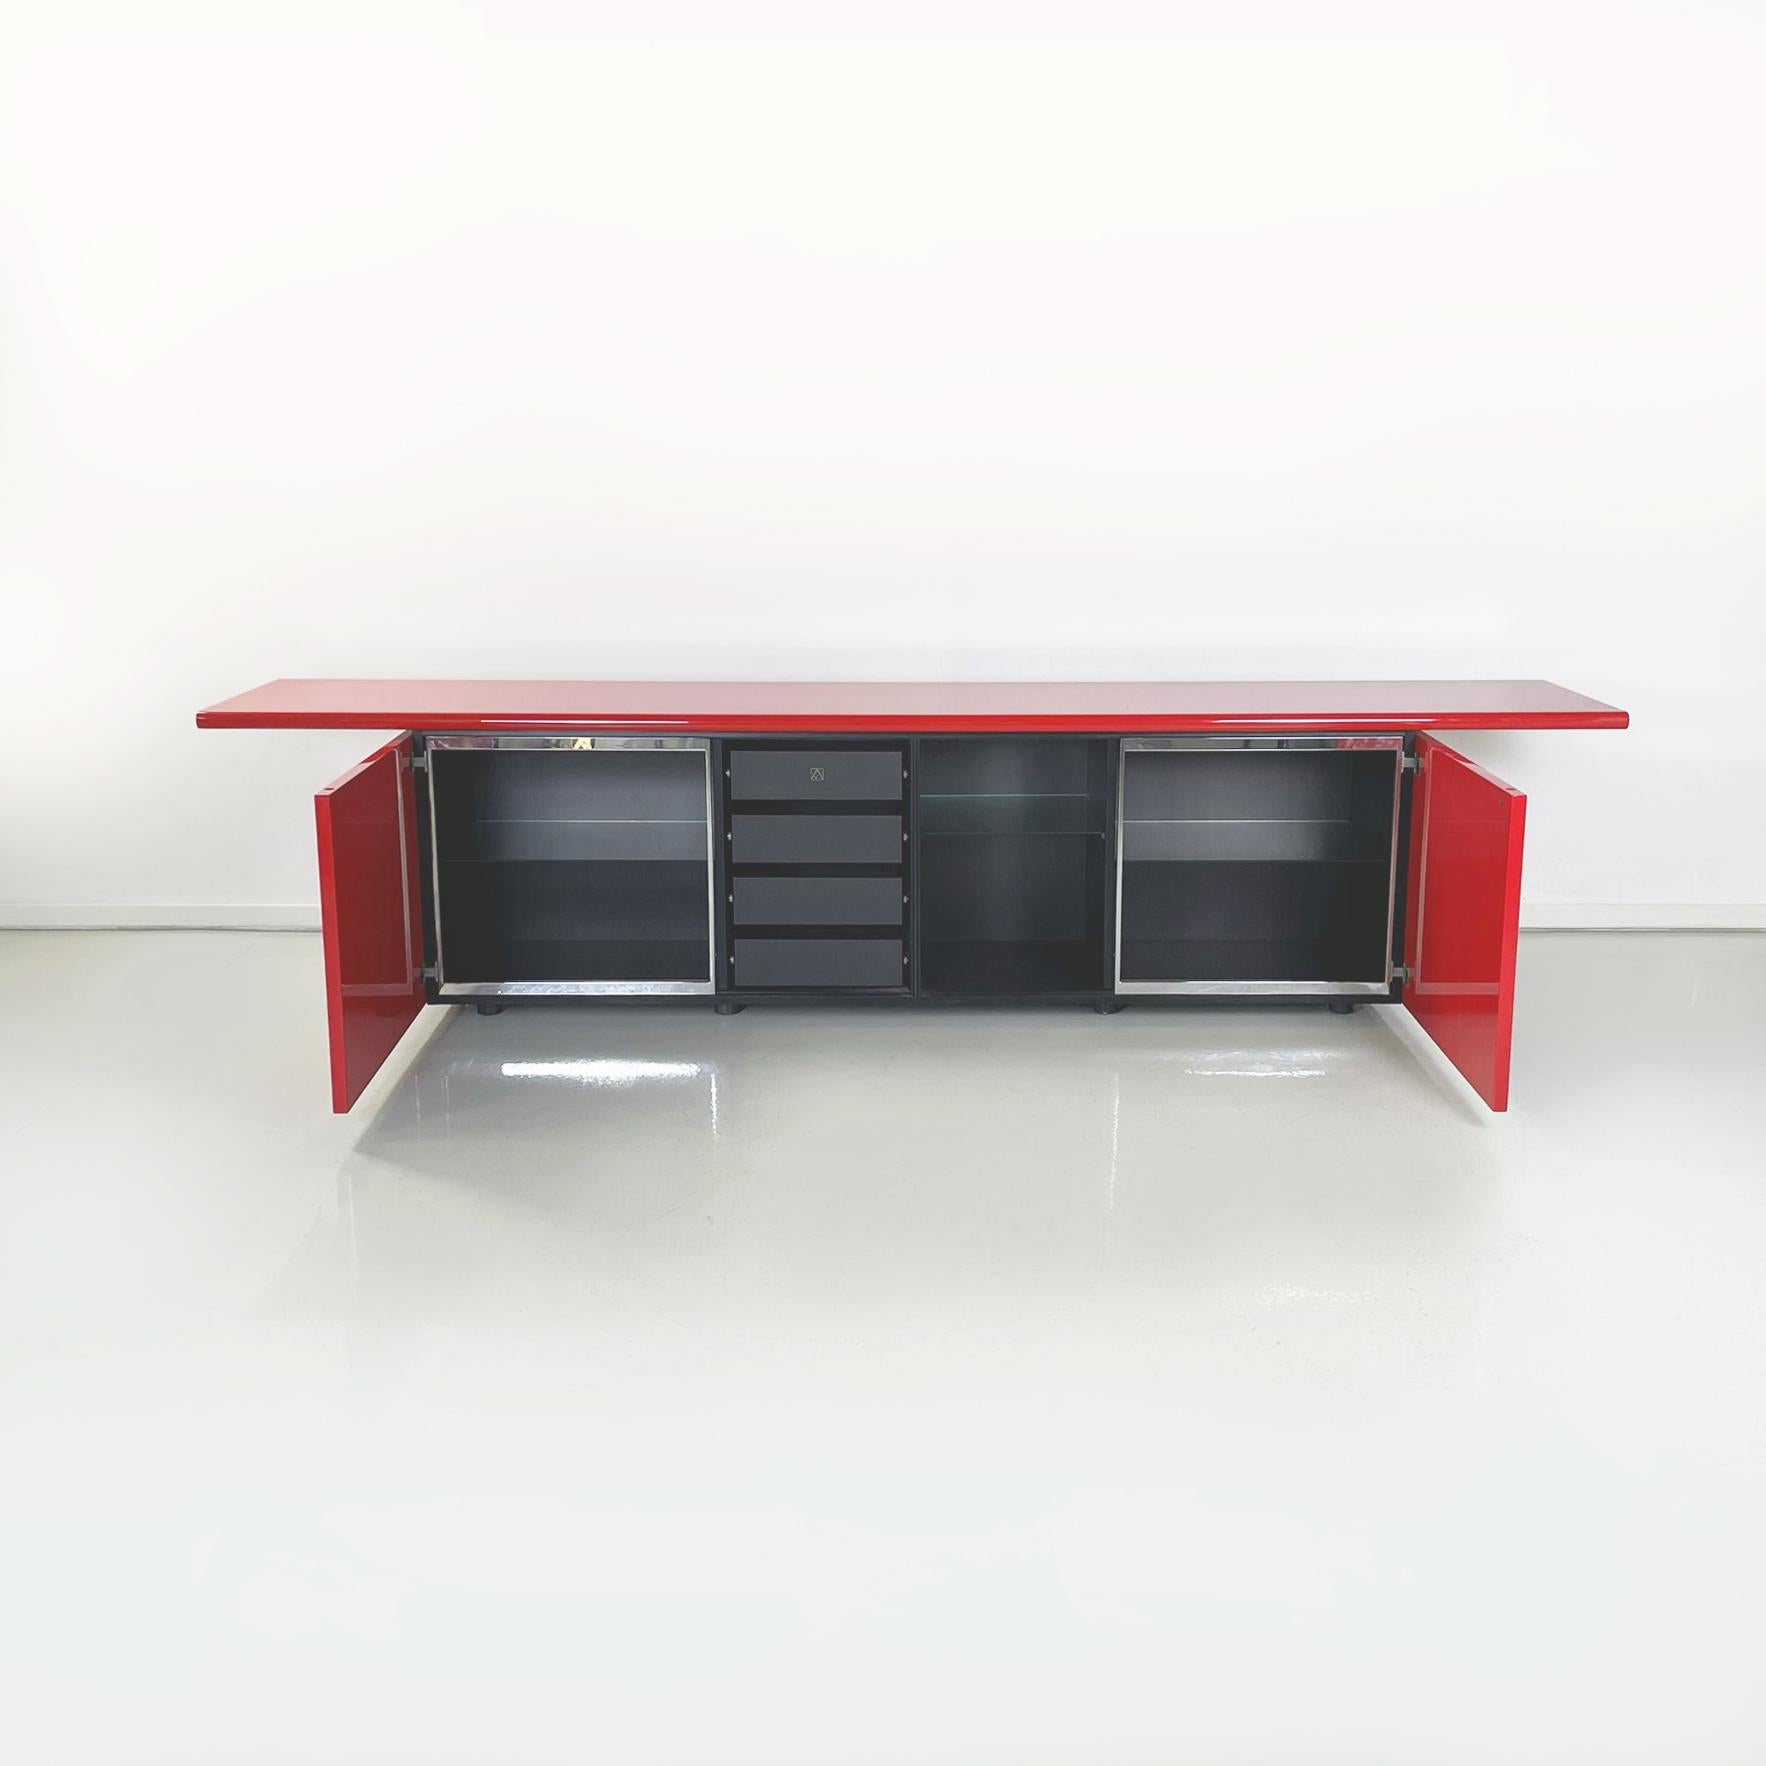 Metal Italian Modern Red Sideboard Sheraton by Stoppino and Acerbis for Acerbis, 1977 For Sale